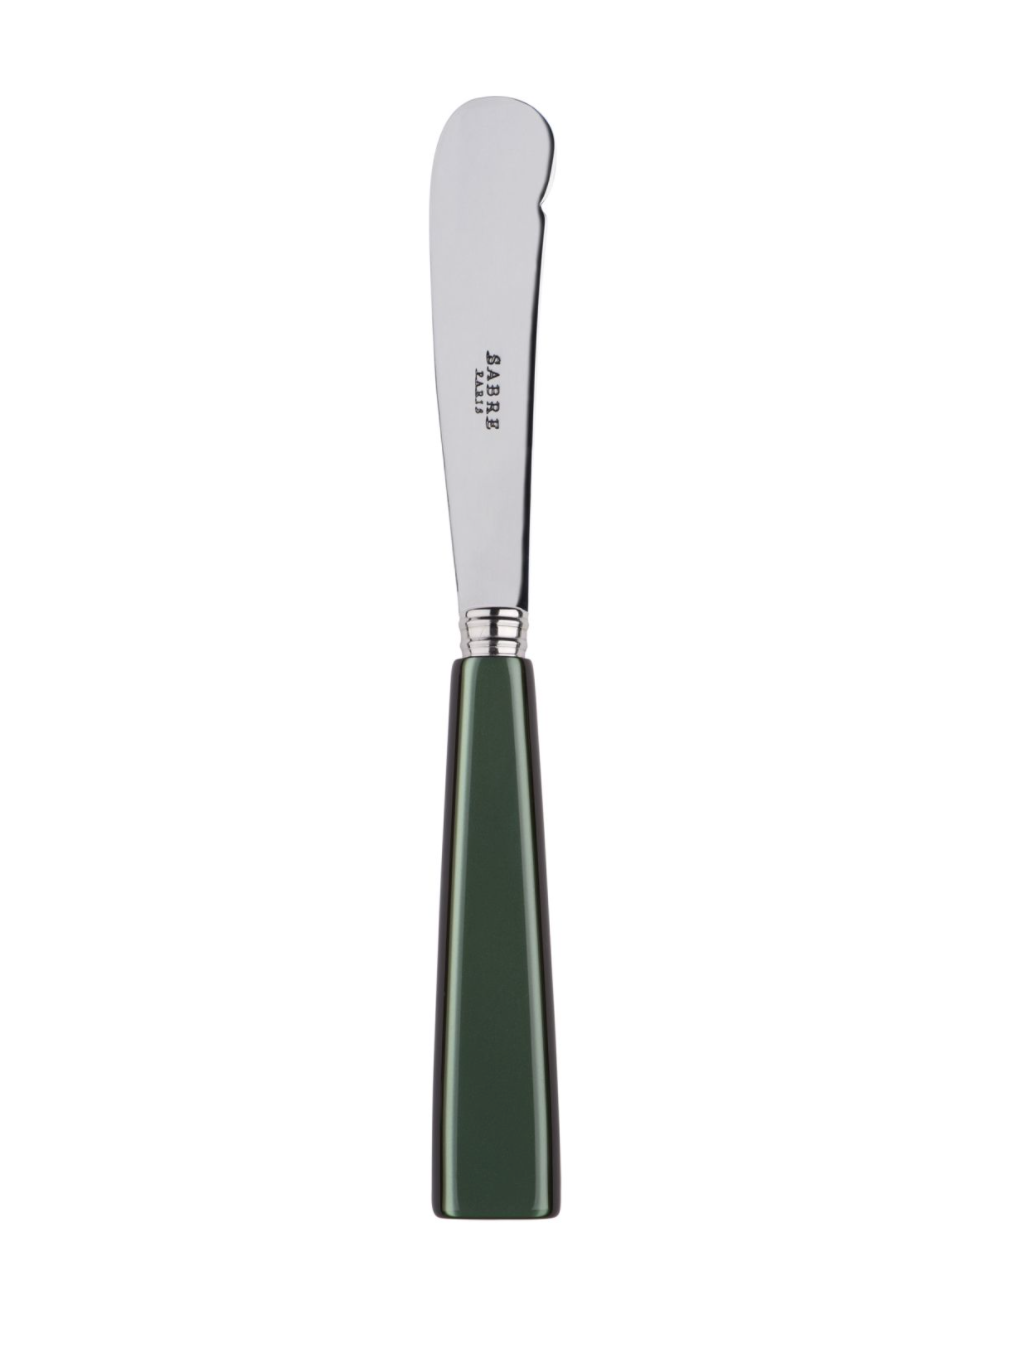 Sabre Icone Butter Knife - Dark Green